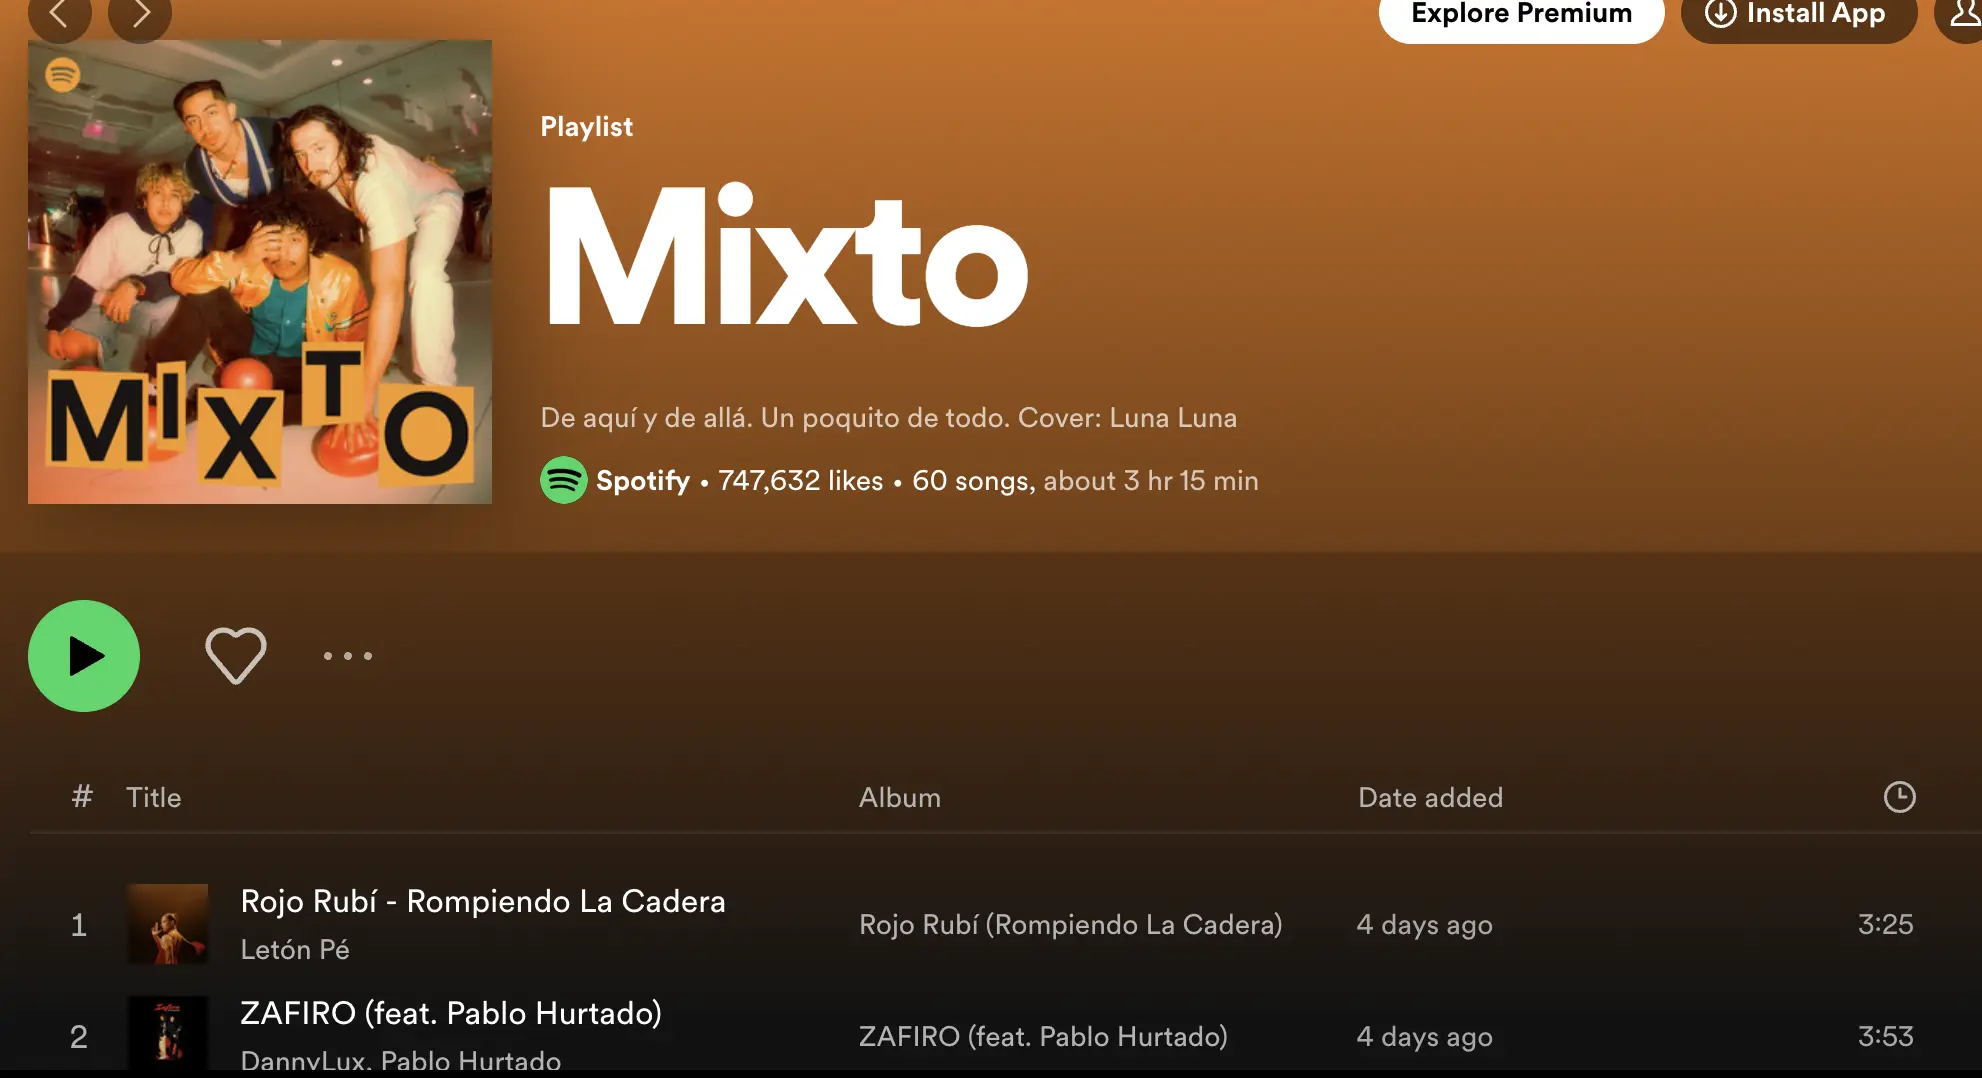 A music app featuring the keyword "mixto" and a case study on Grace Gaustad.